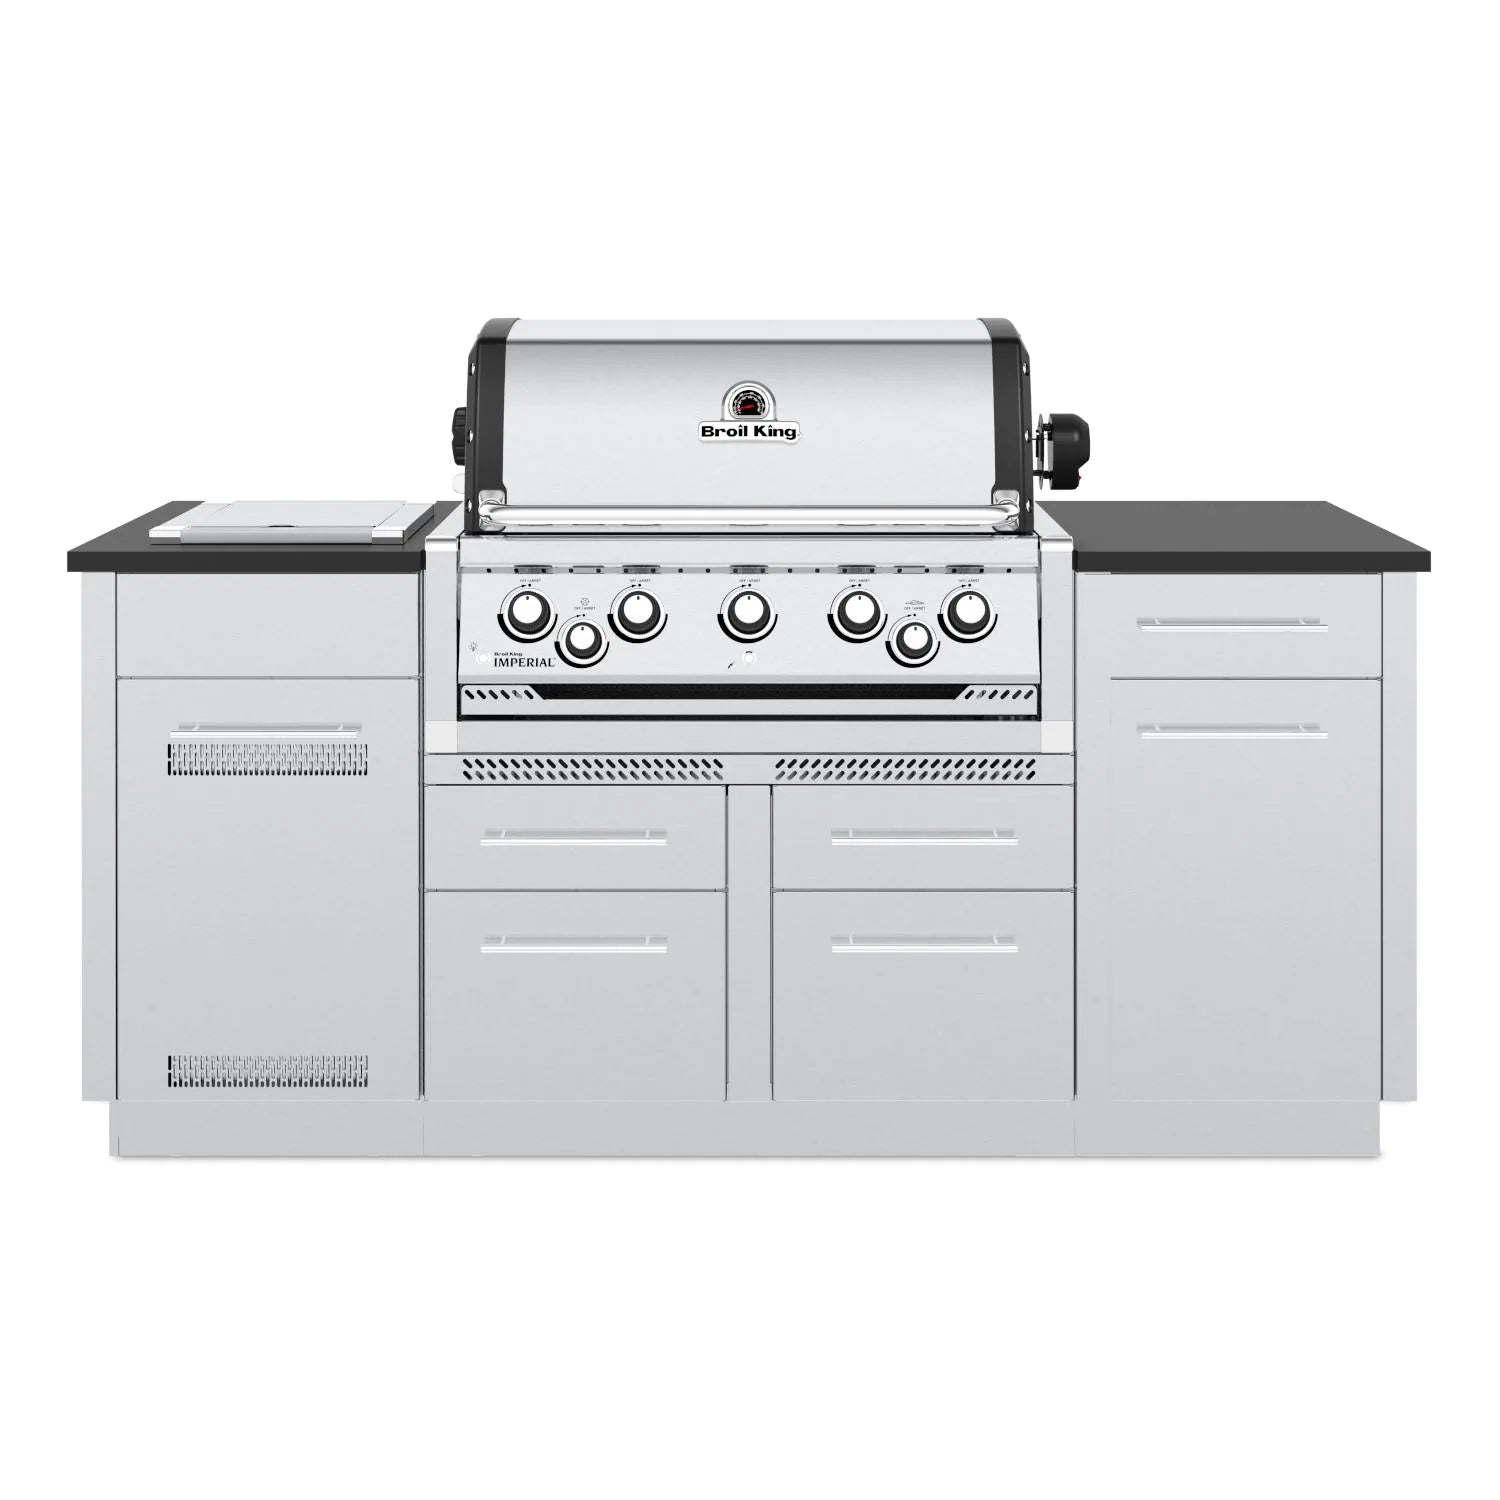 Broil King 896844 Imperial S 590i 5-Burner Propane Gas Grill Center With Rotisserie & Side Burner - Stainless Steel